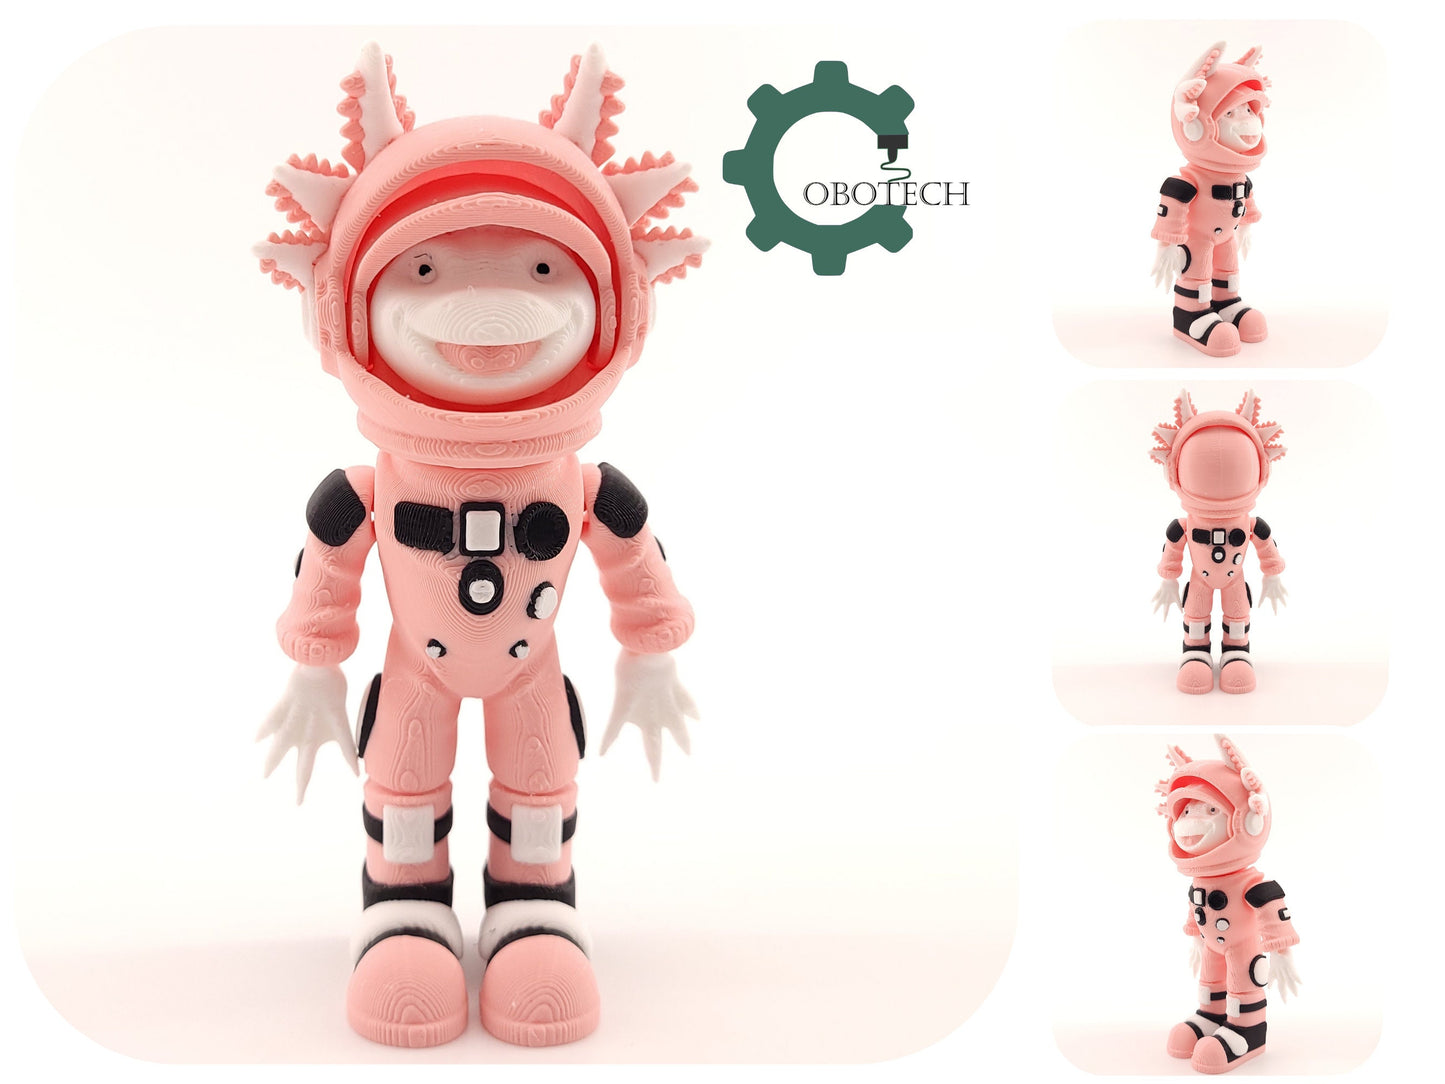 3D Print Articulated Axolotl Astronaut by Cobotech, Articulated Toys, Desk Decor, Cool Gift